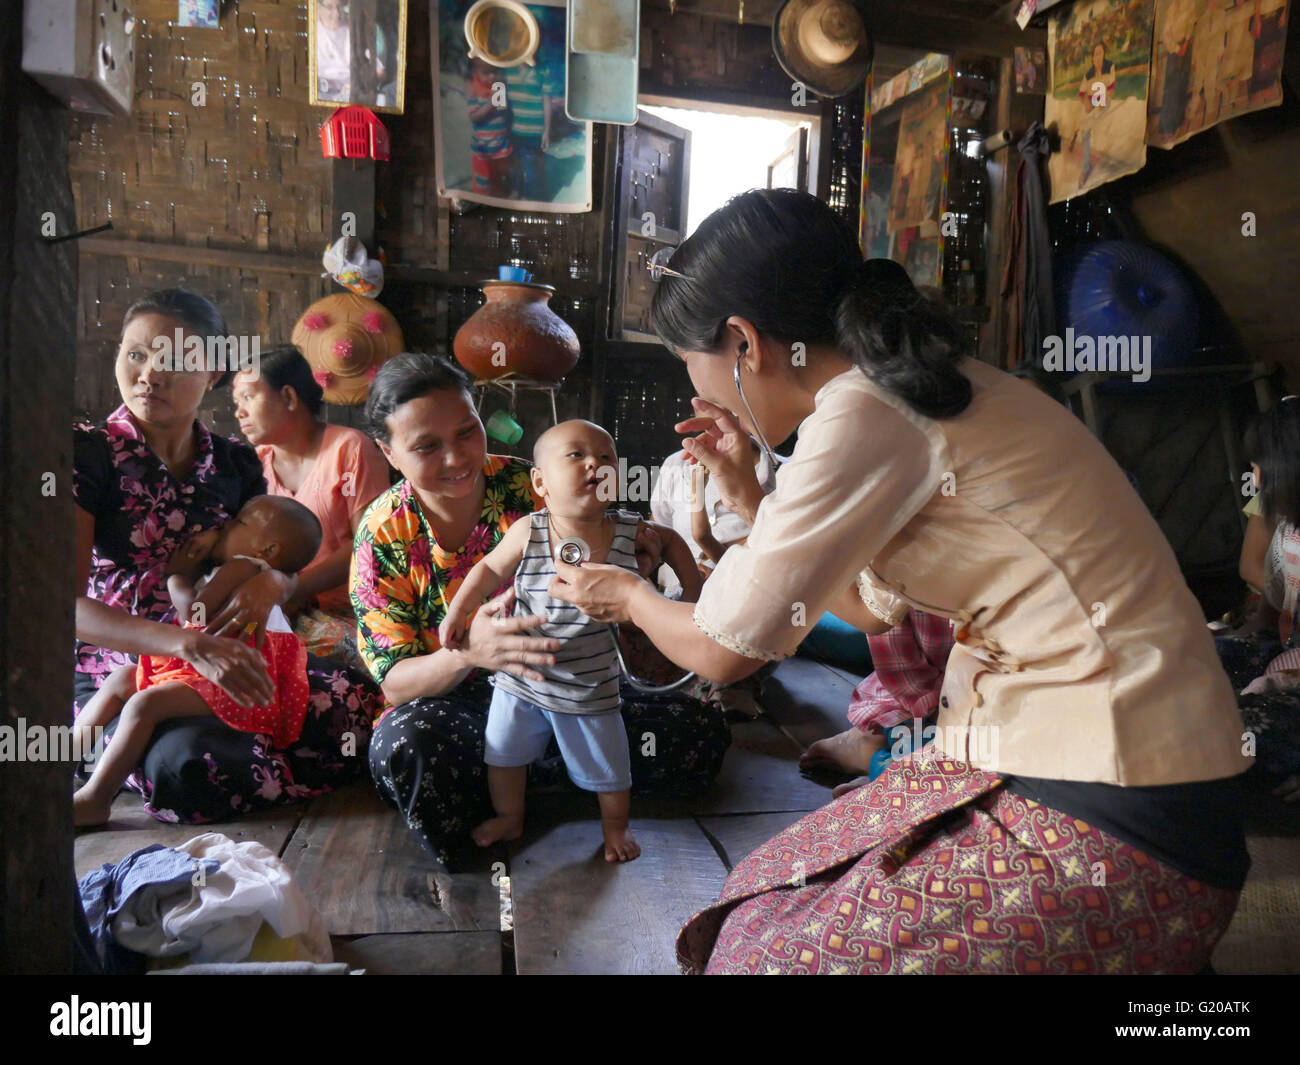 MYANMAR Hlaing Thayer, a slum of Yangon where people were relocated after the 2008 typhoon. MCHAN is active in this area with its community based health program. Visiting a house where MCHAN performs health check-ups and conducts workshops. MCHAN nurse Monica Yaw Myu Hli examines a healthy baby. Stock Photo